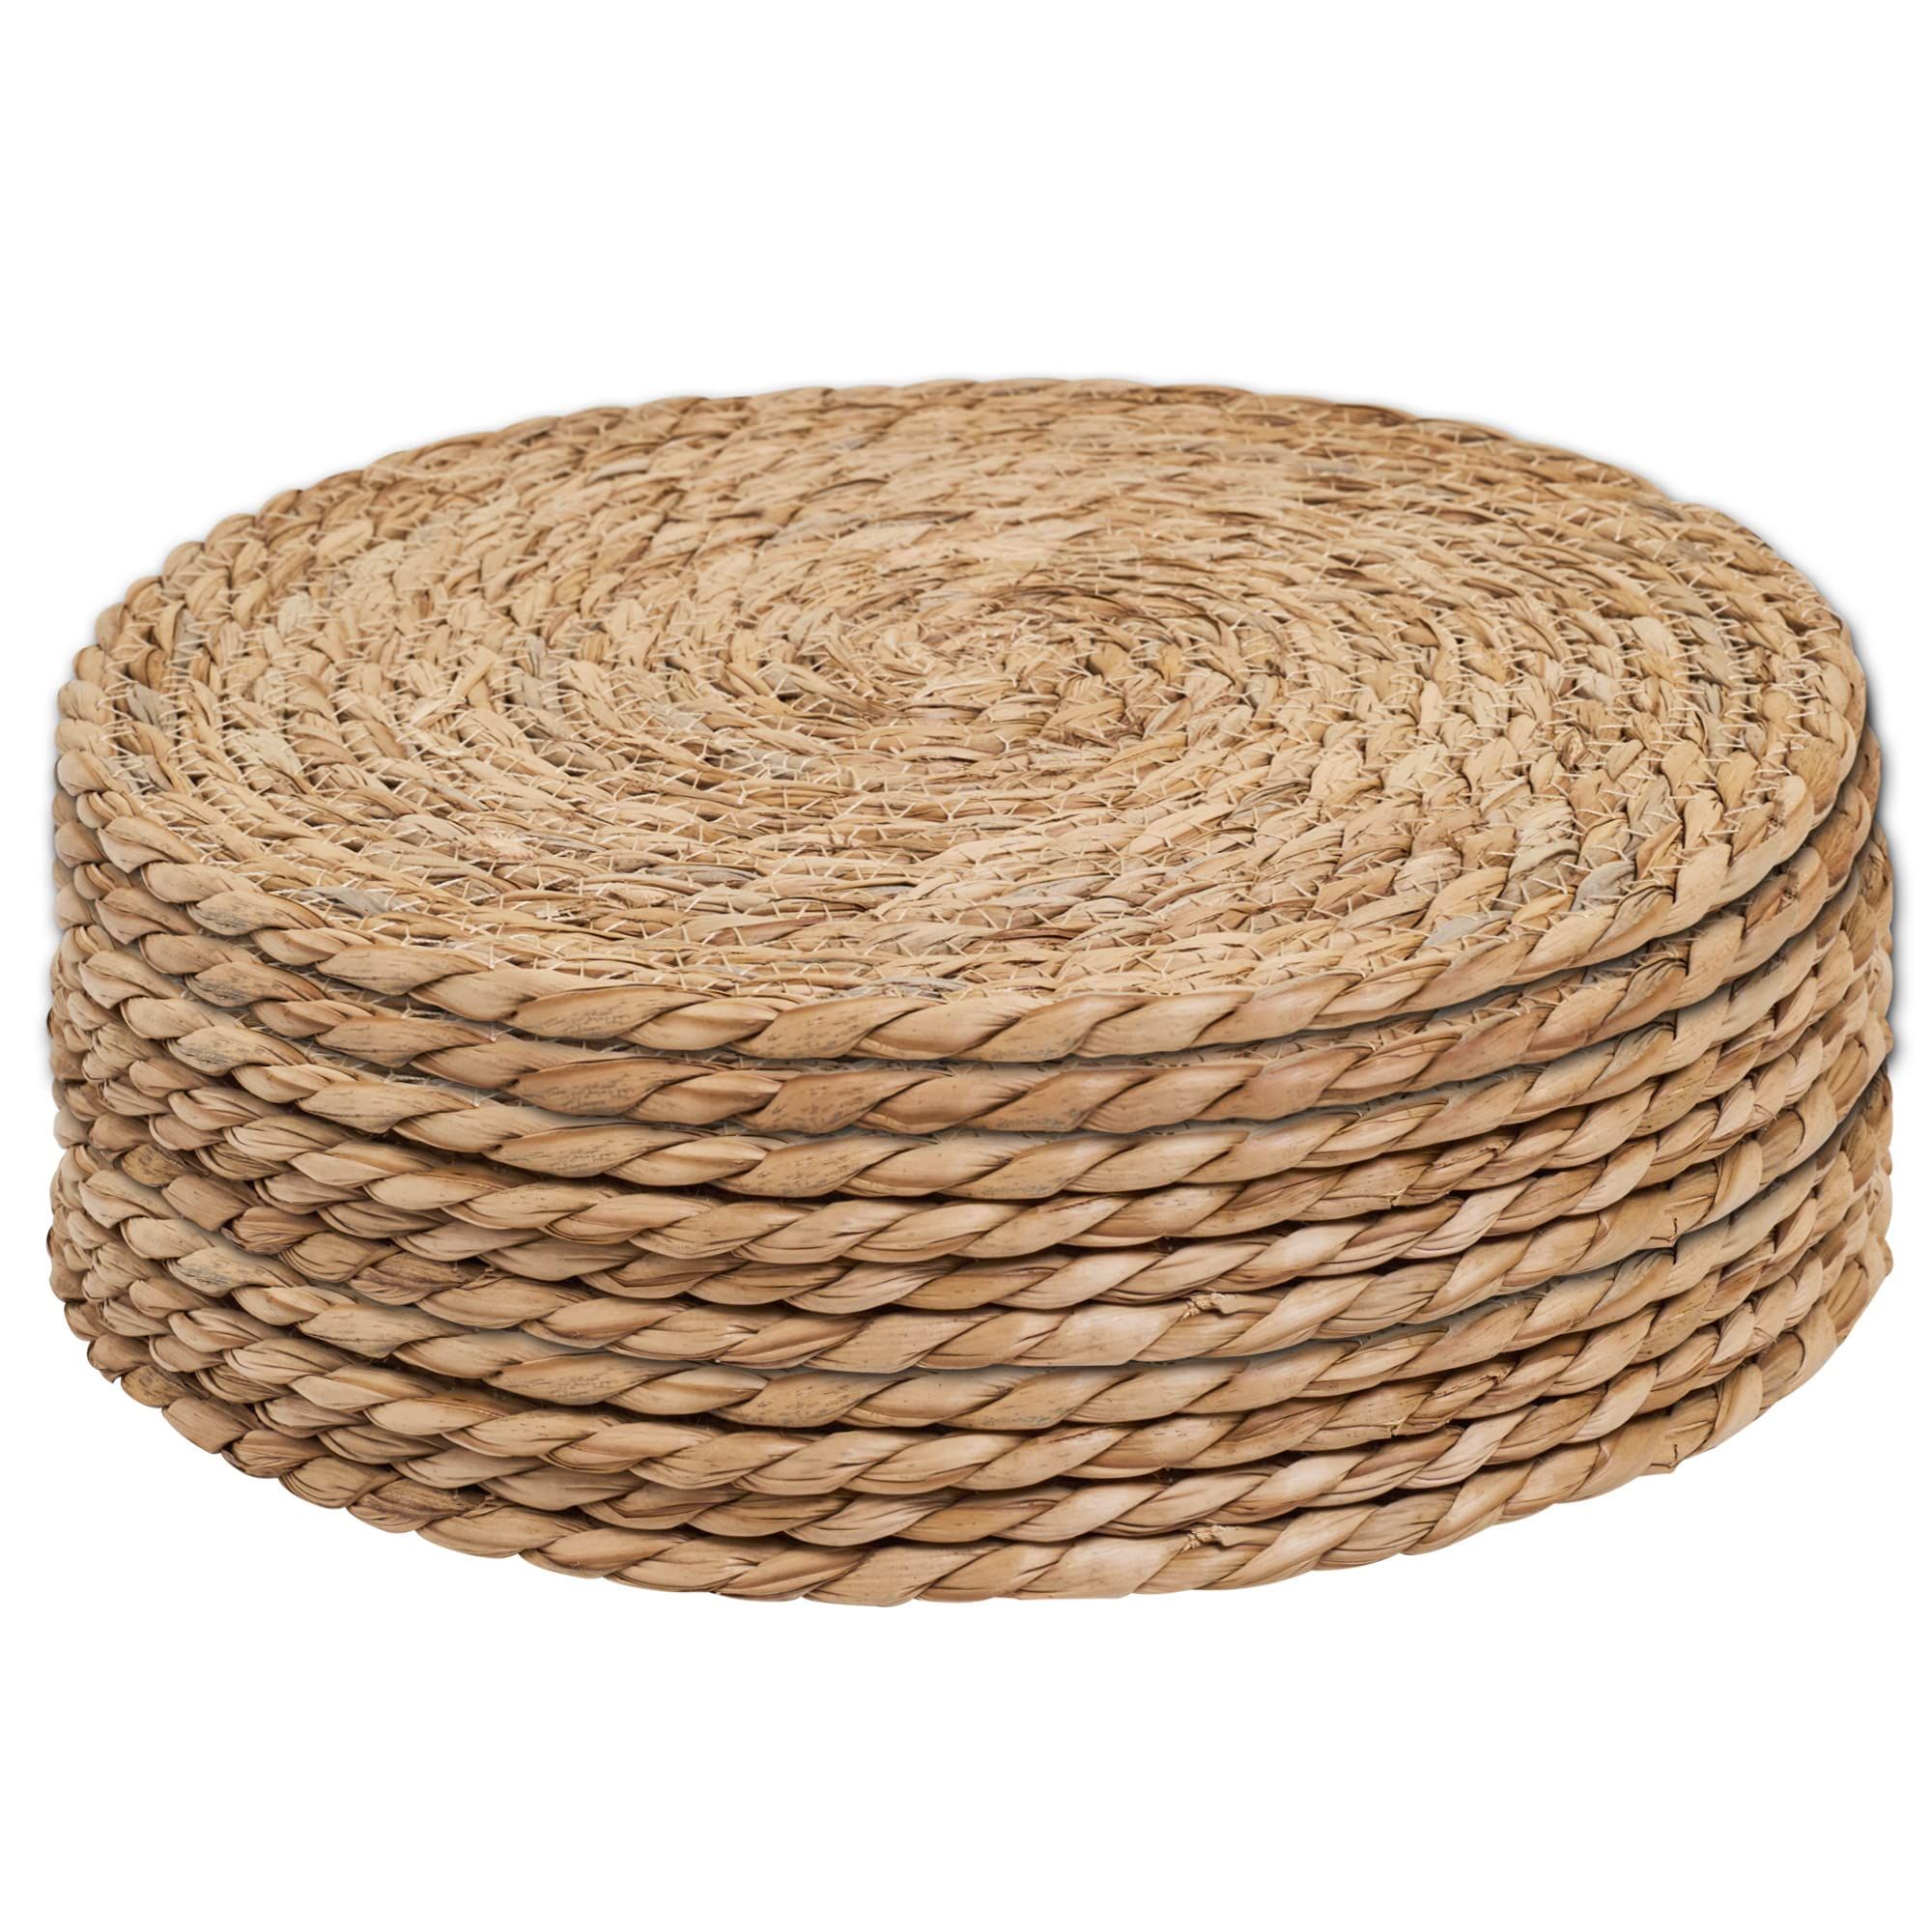 Defined Deco Woven Placemats Set of 10,12" Round Rattan Placemats,Natural Hand-Woven Water Hyacin... | Amazon (US)